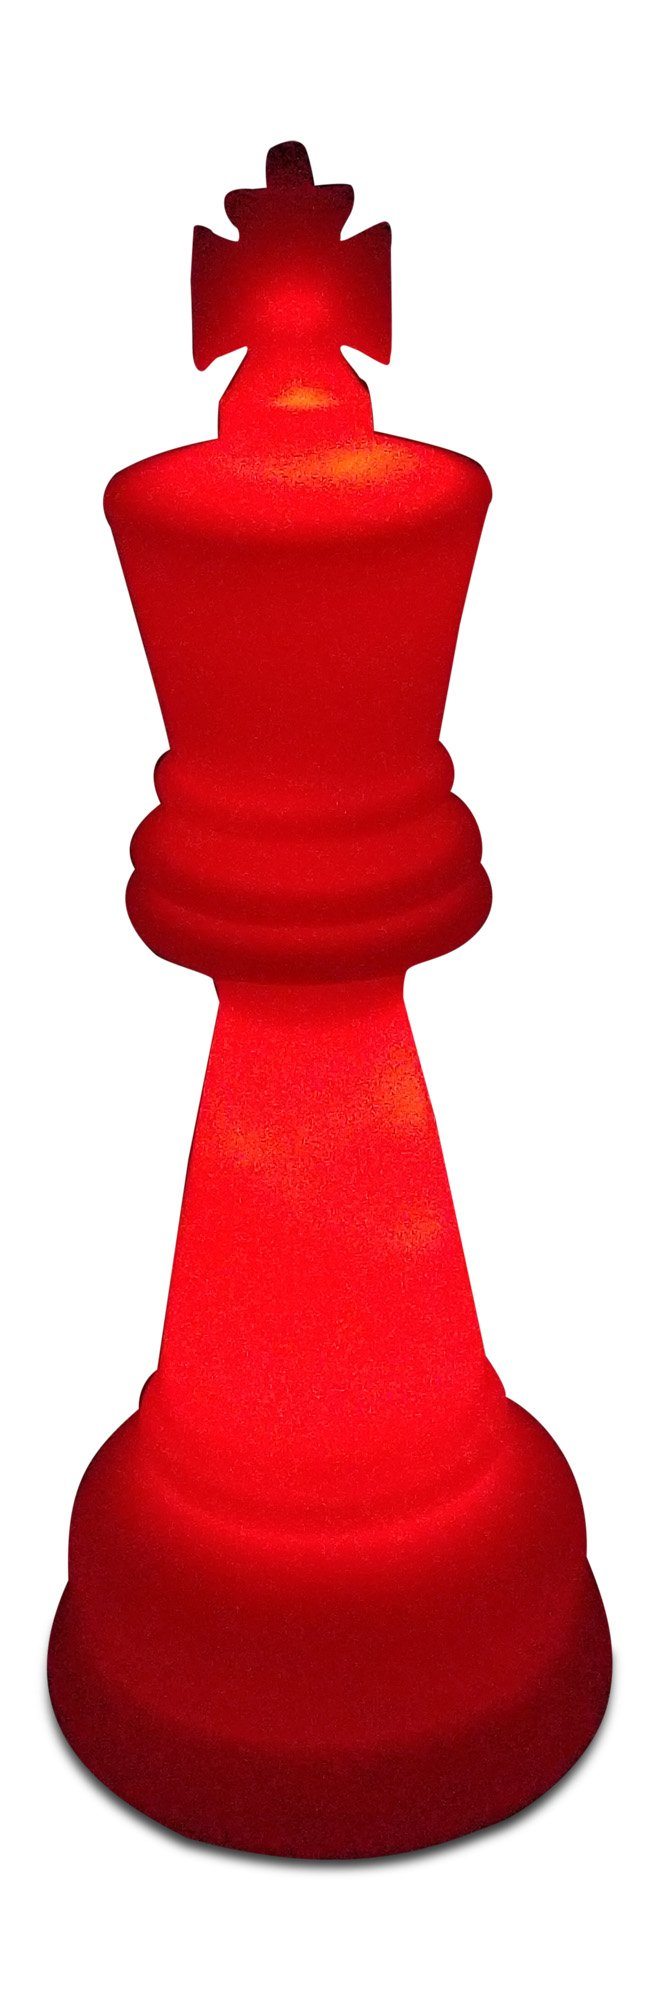 MegaChess 38 Inch Premium Plastic King Light-Up Giant Chess Piece - Red | Default Title | GiantChessUSA